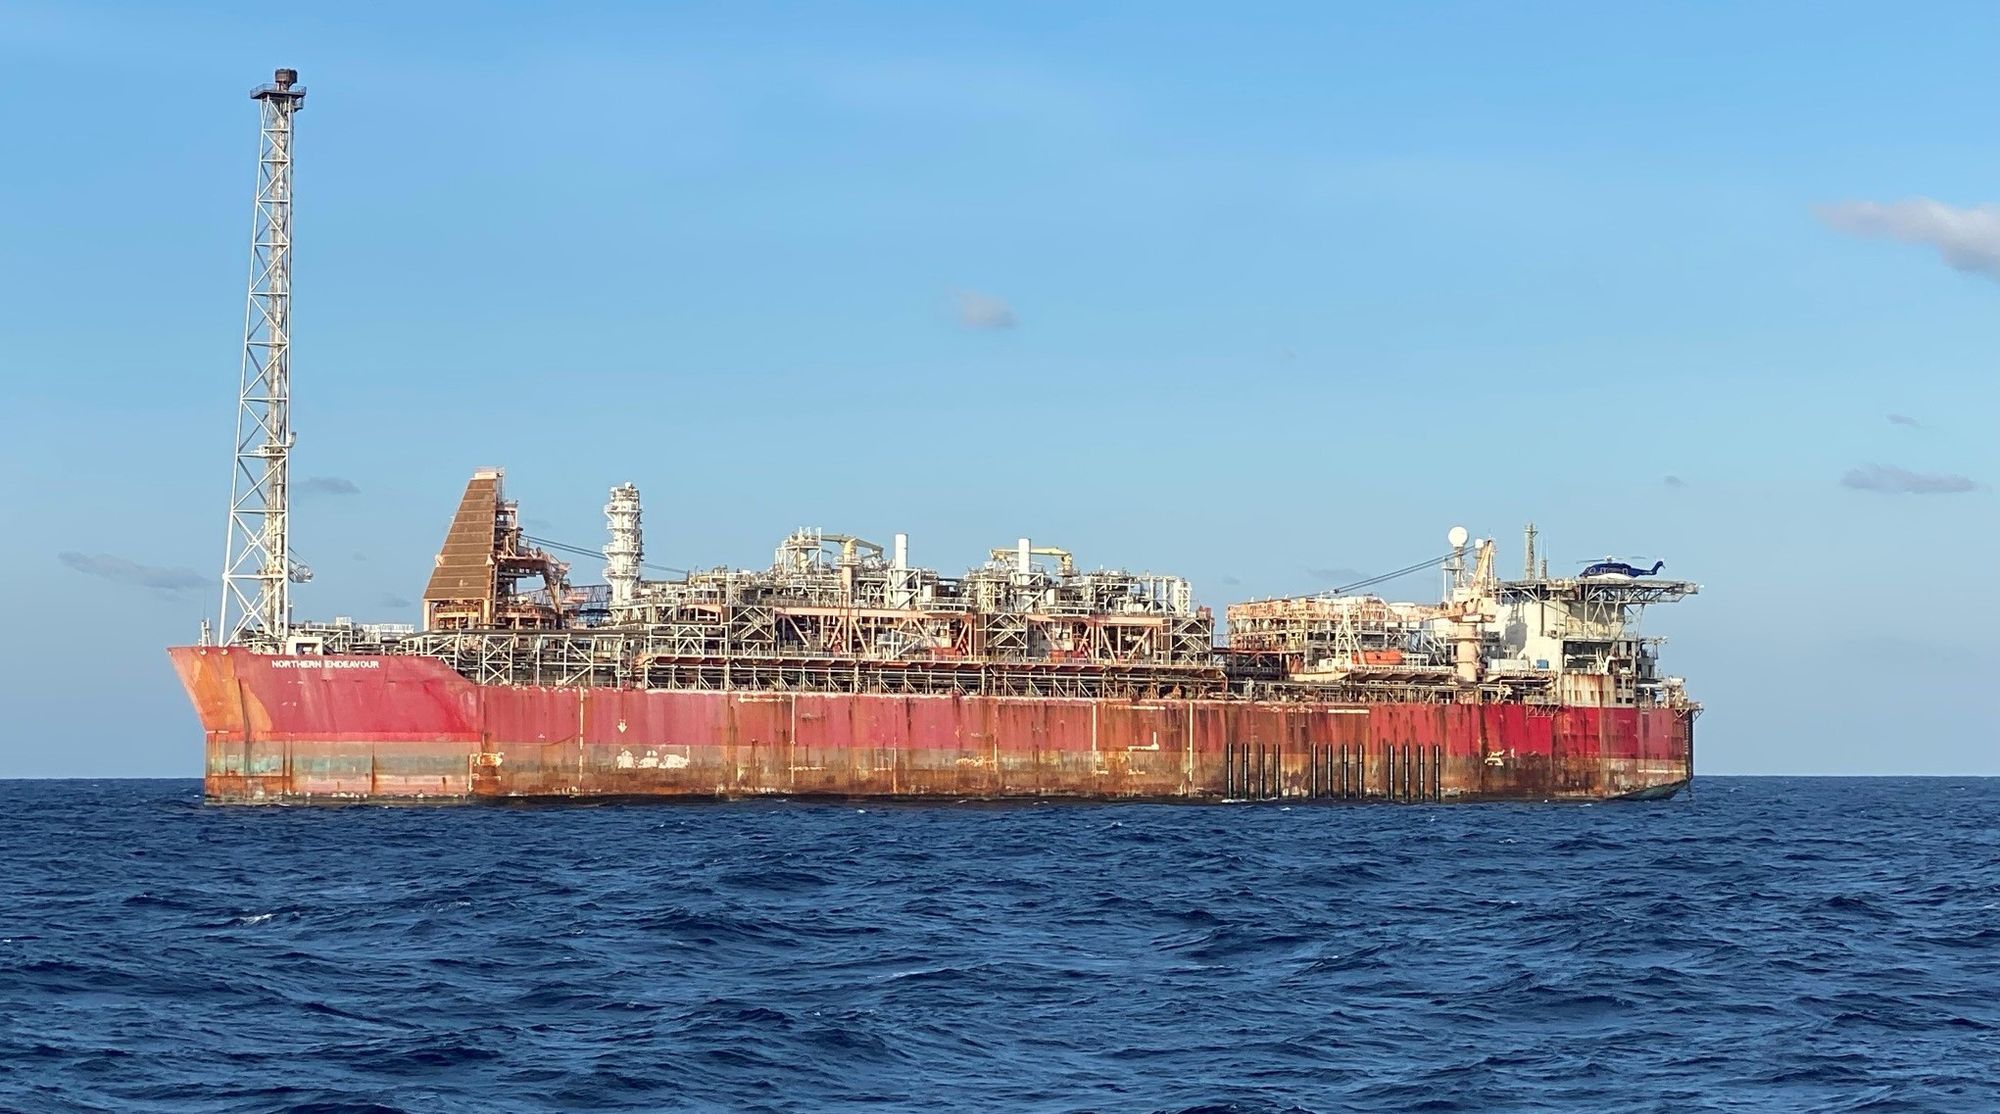 Federal Government controlled Northern Endeavour oil vessel rusting in the Timor Sea in mid-2021